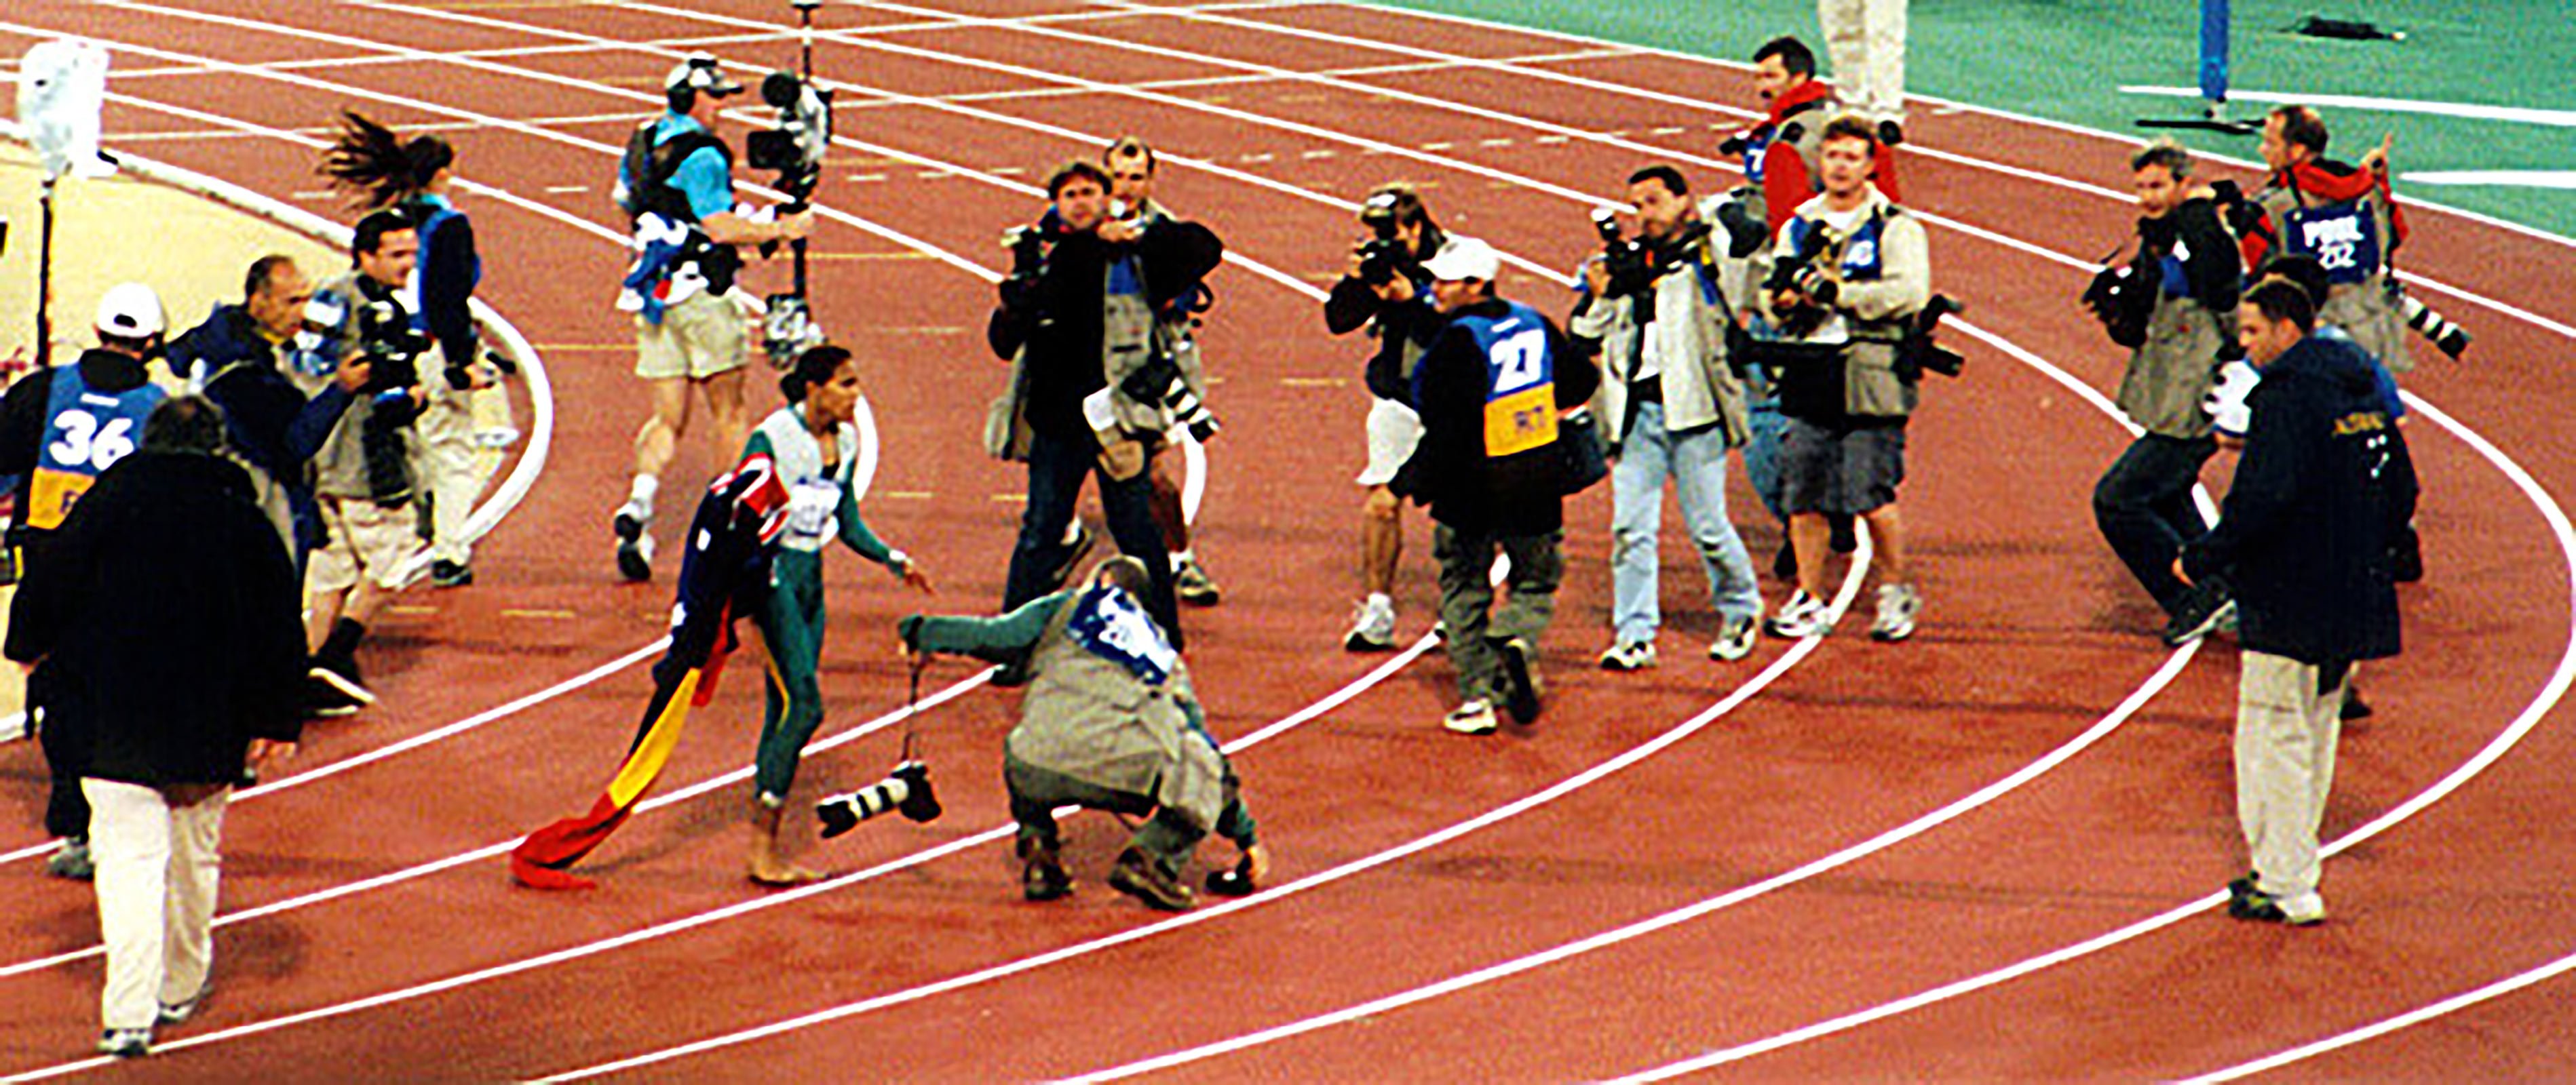 Photographers gathered around Cathy Freeman after she won the 400m final at the Sydney Olympics, 25 September 2000